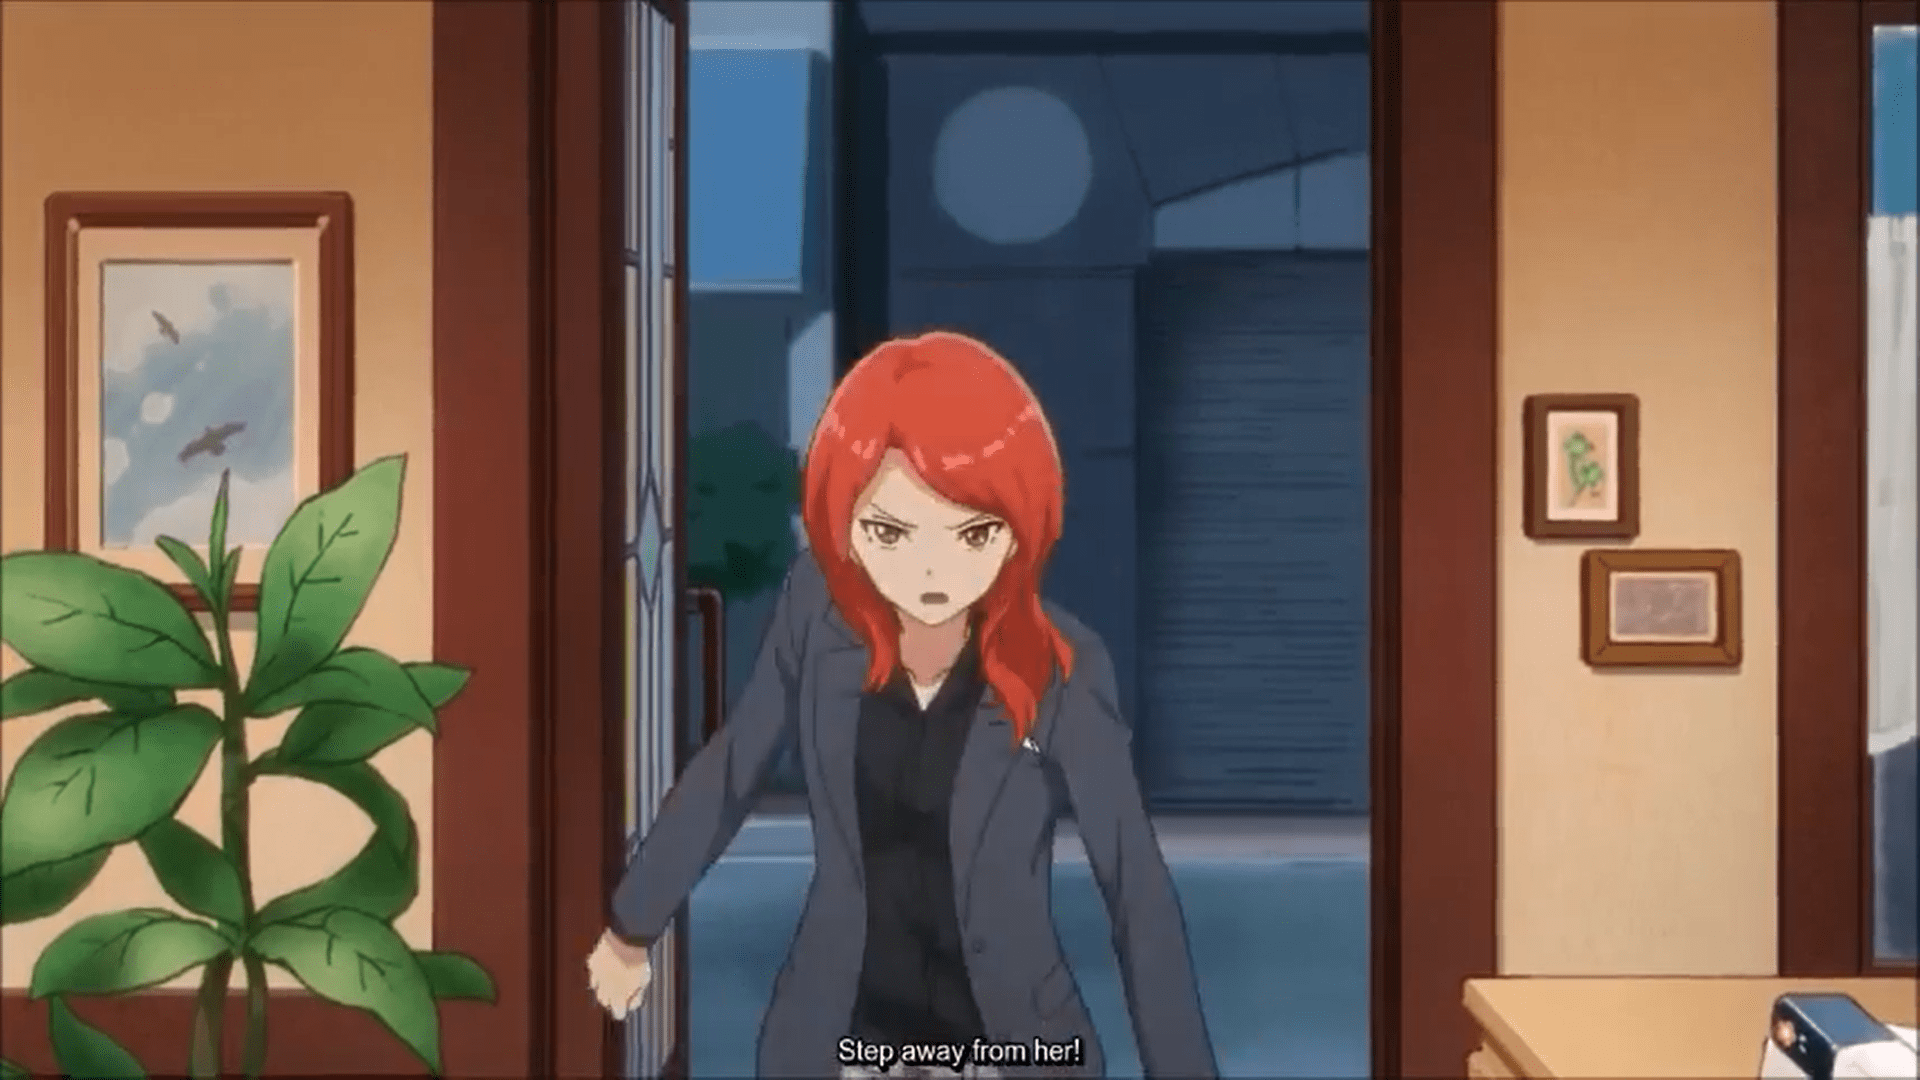 Best Anime GIrls with red hair